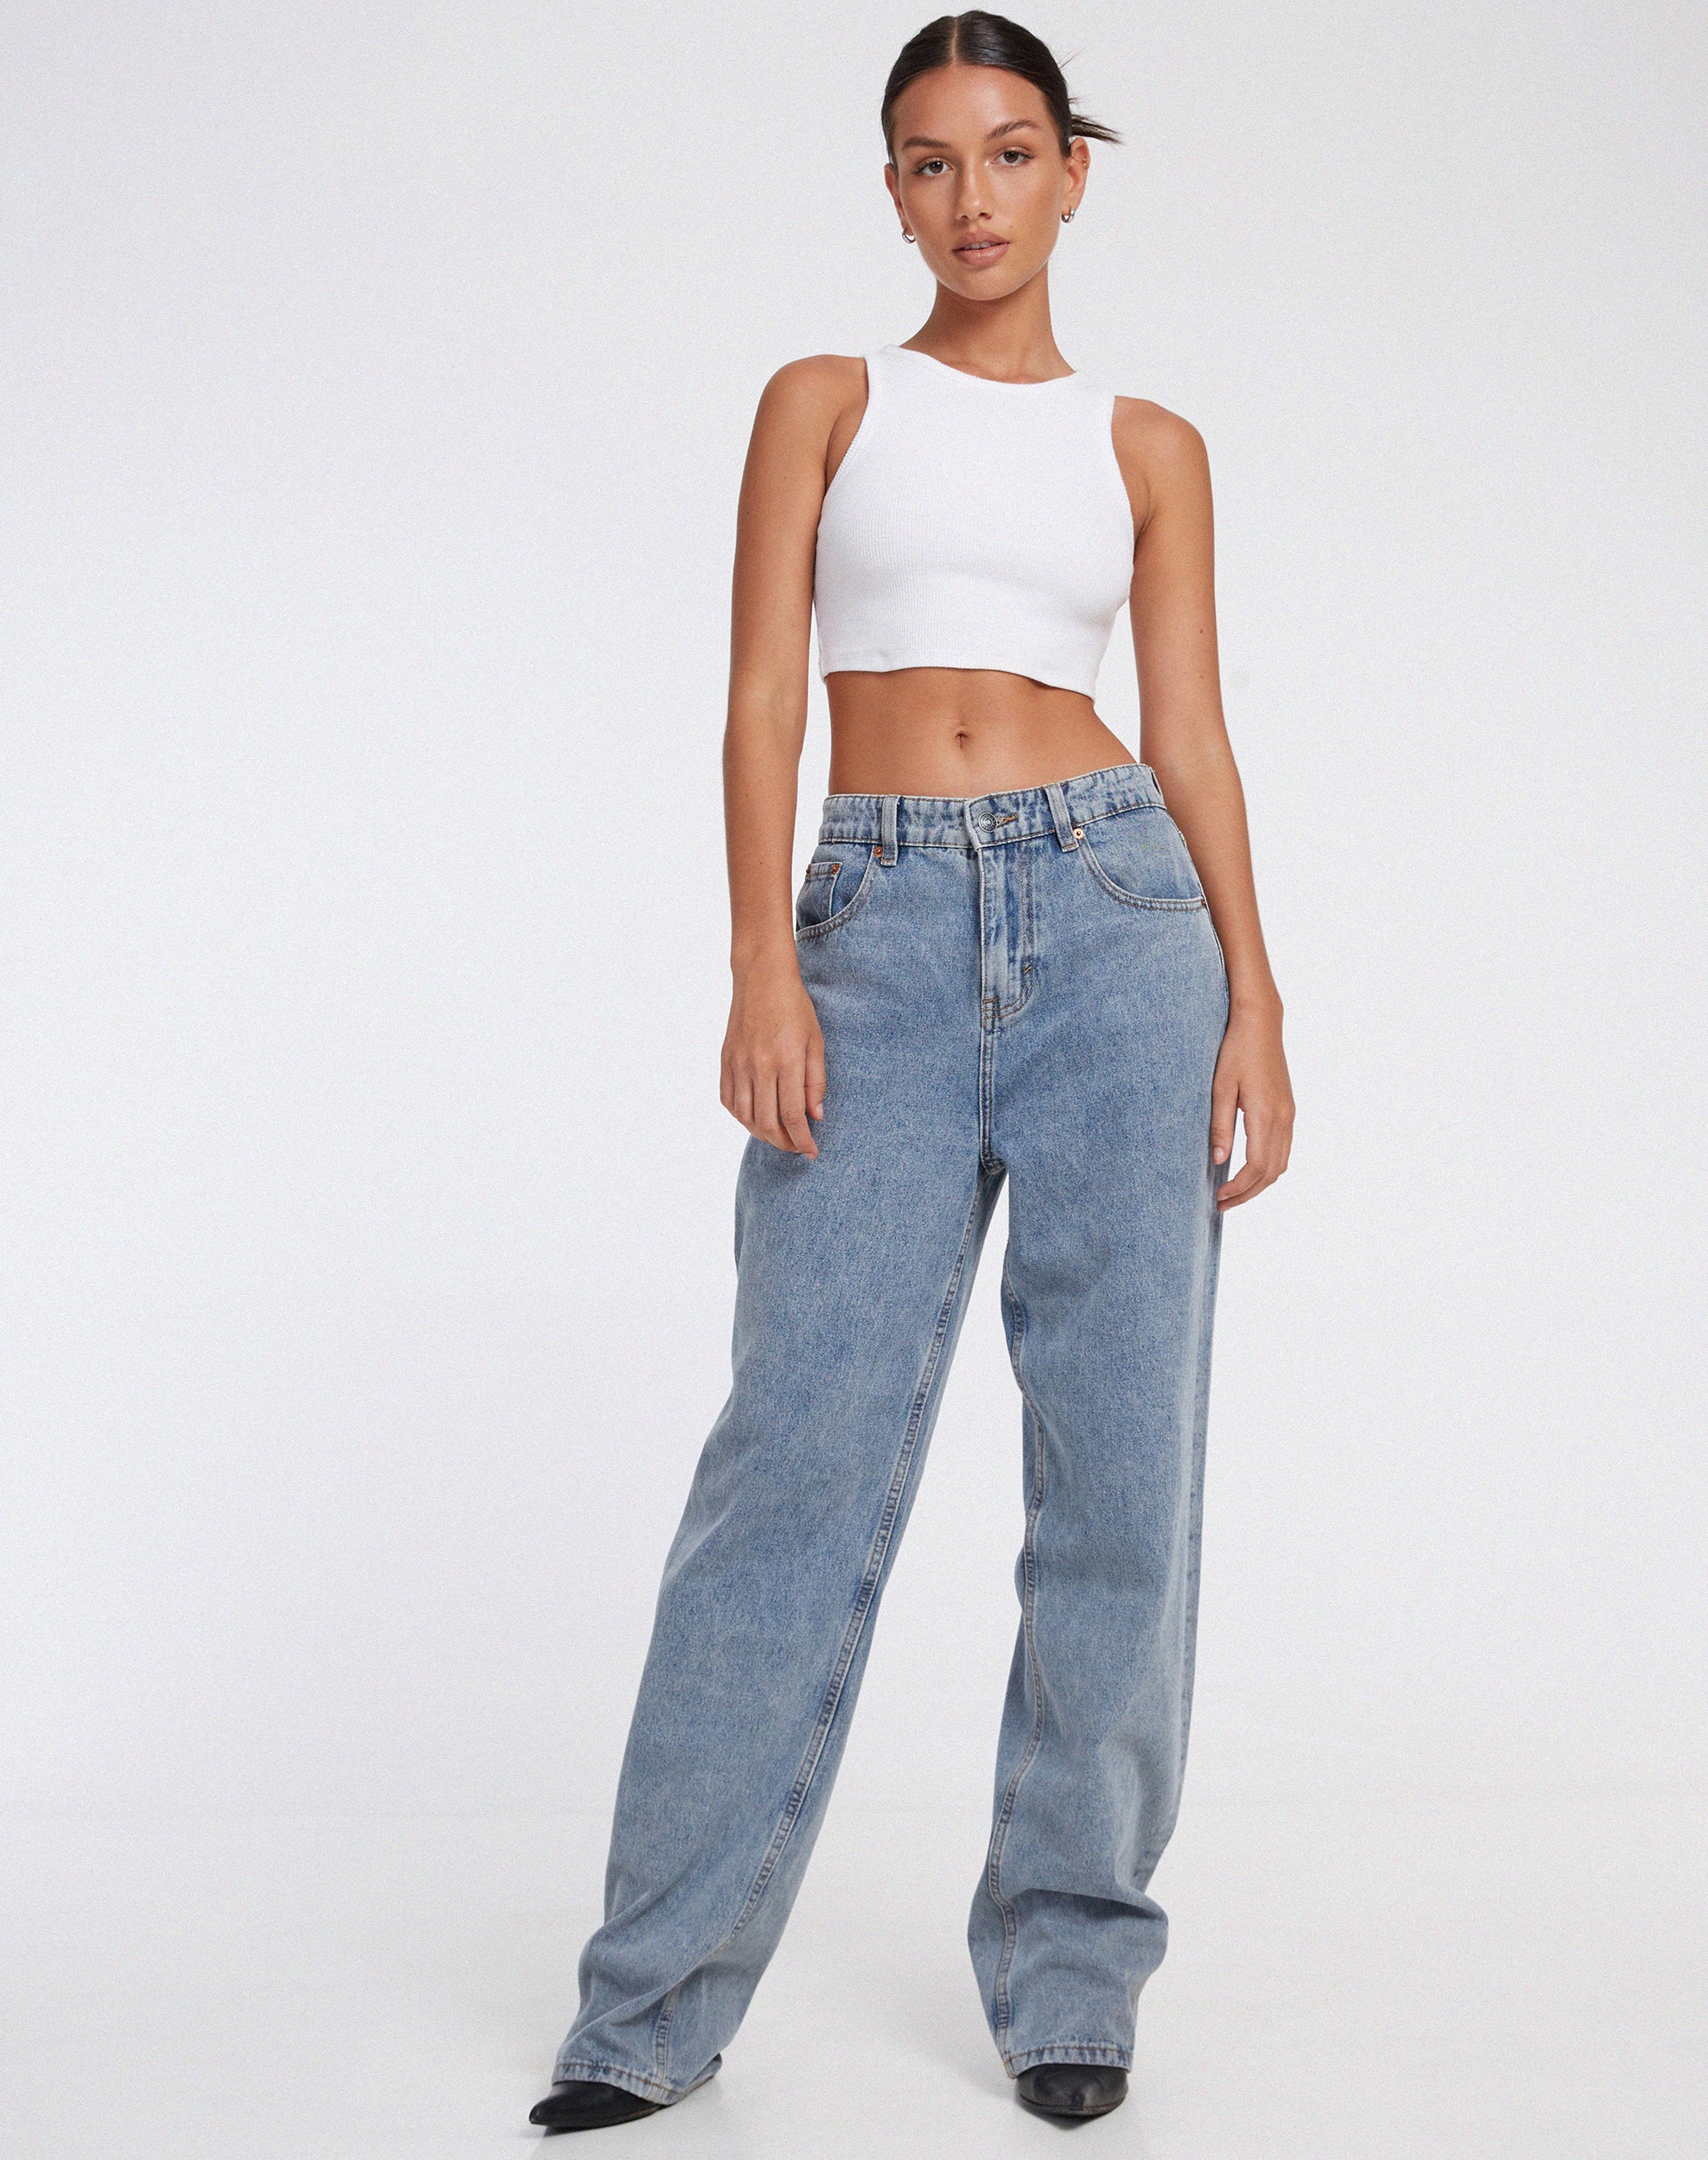 image of Leah Crop Top in Rib White